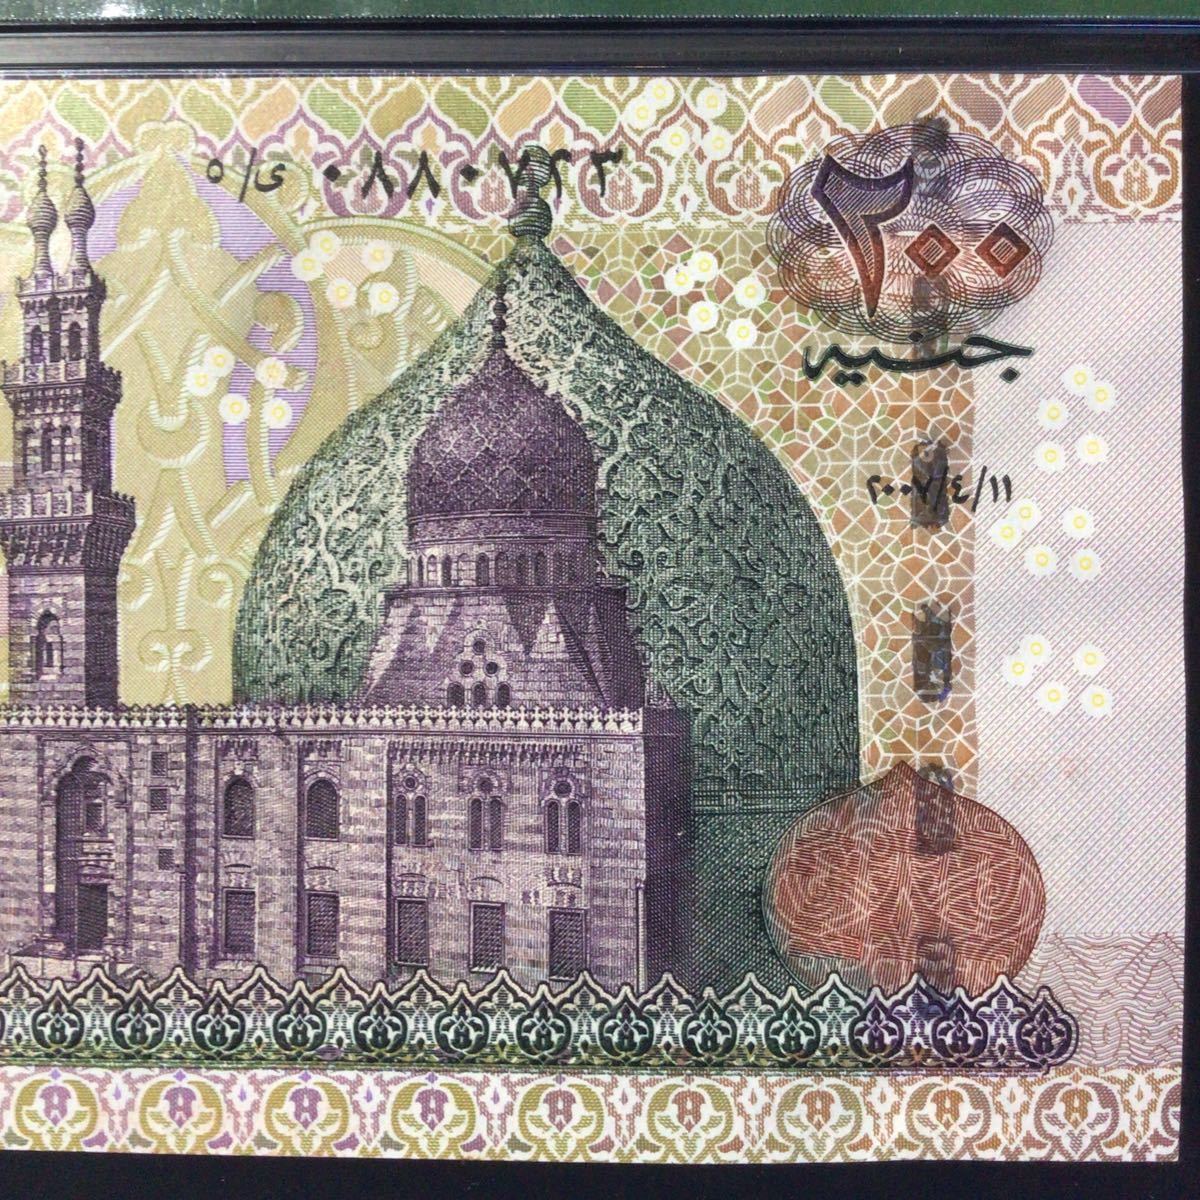 World Banknote Grading EGYPT《 Central Bank 》200 Pounds【2007】『PMG Grading Gem Uncirculated 66 EPQ』